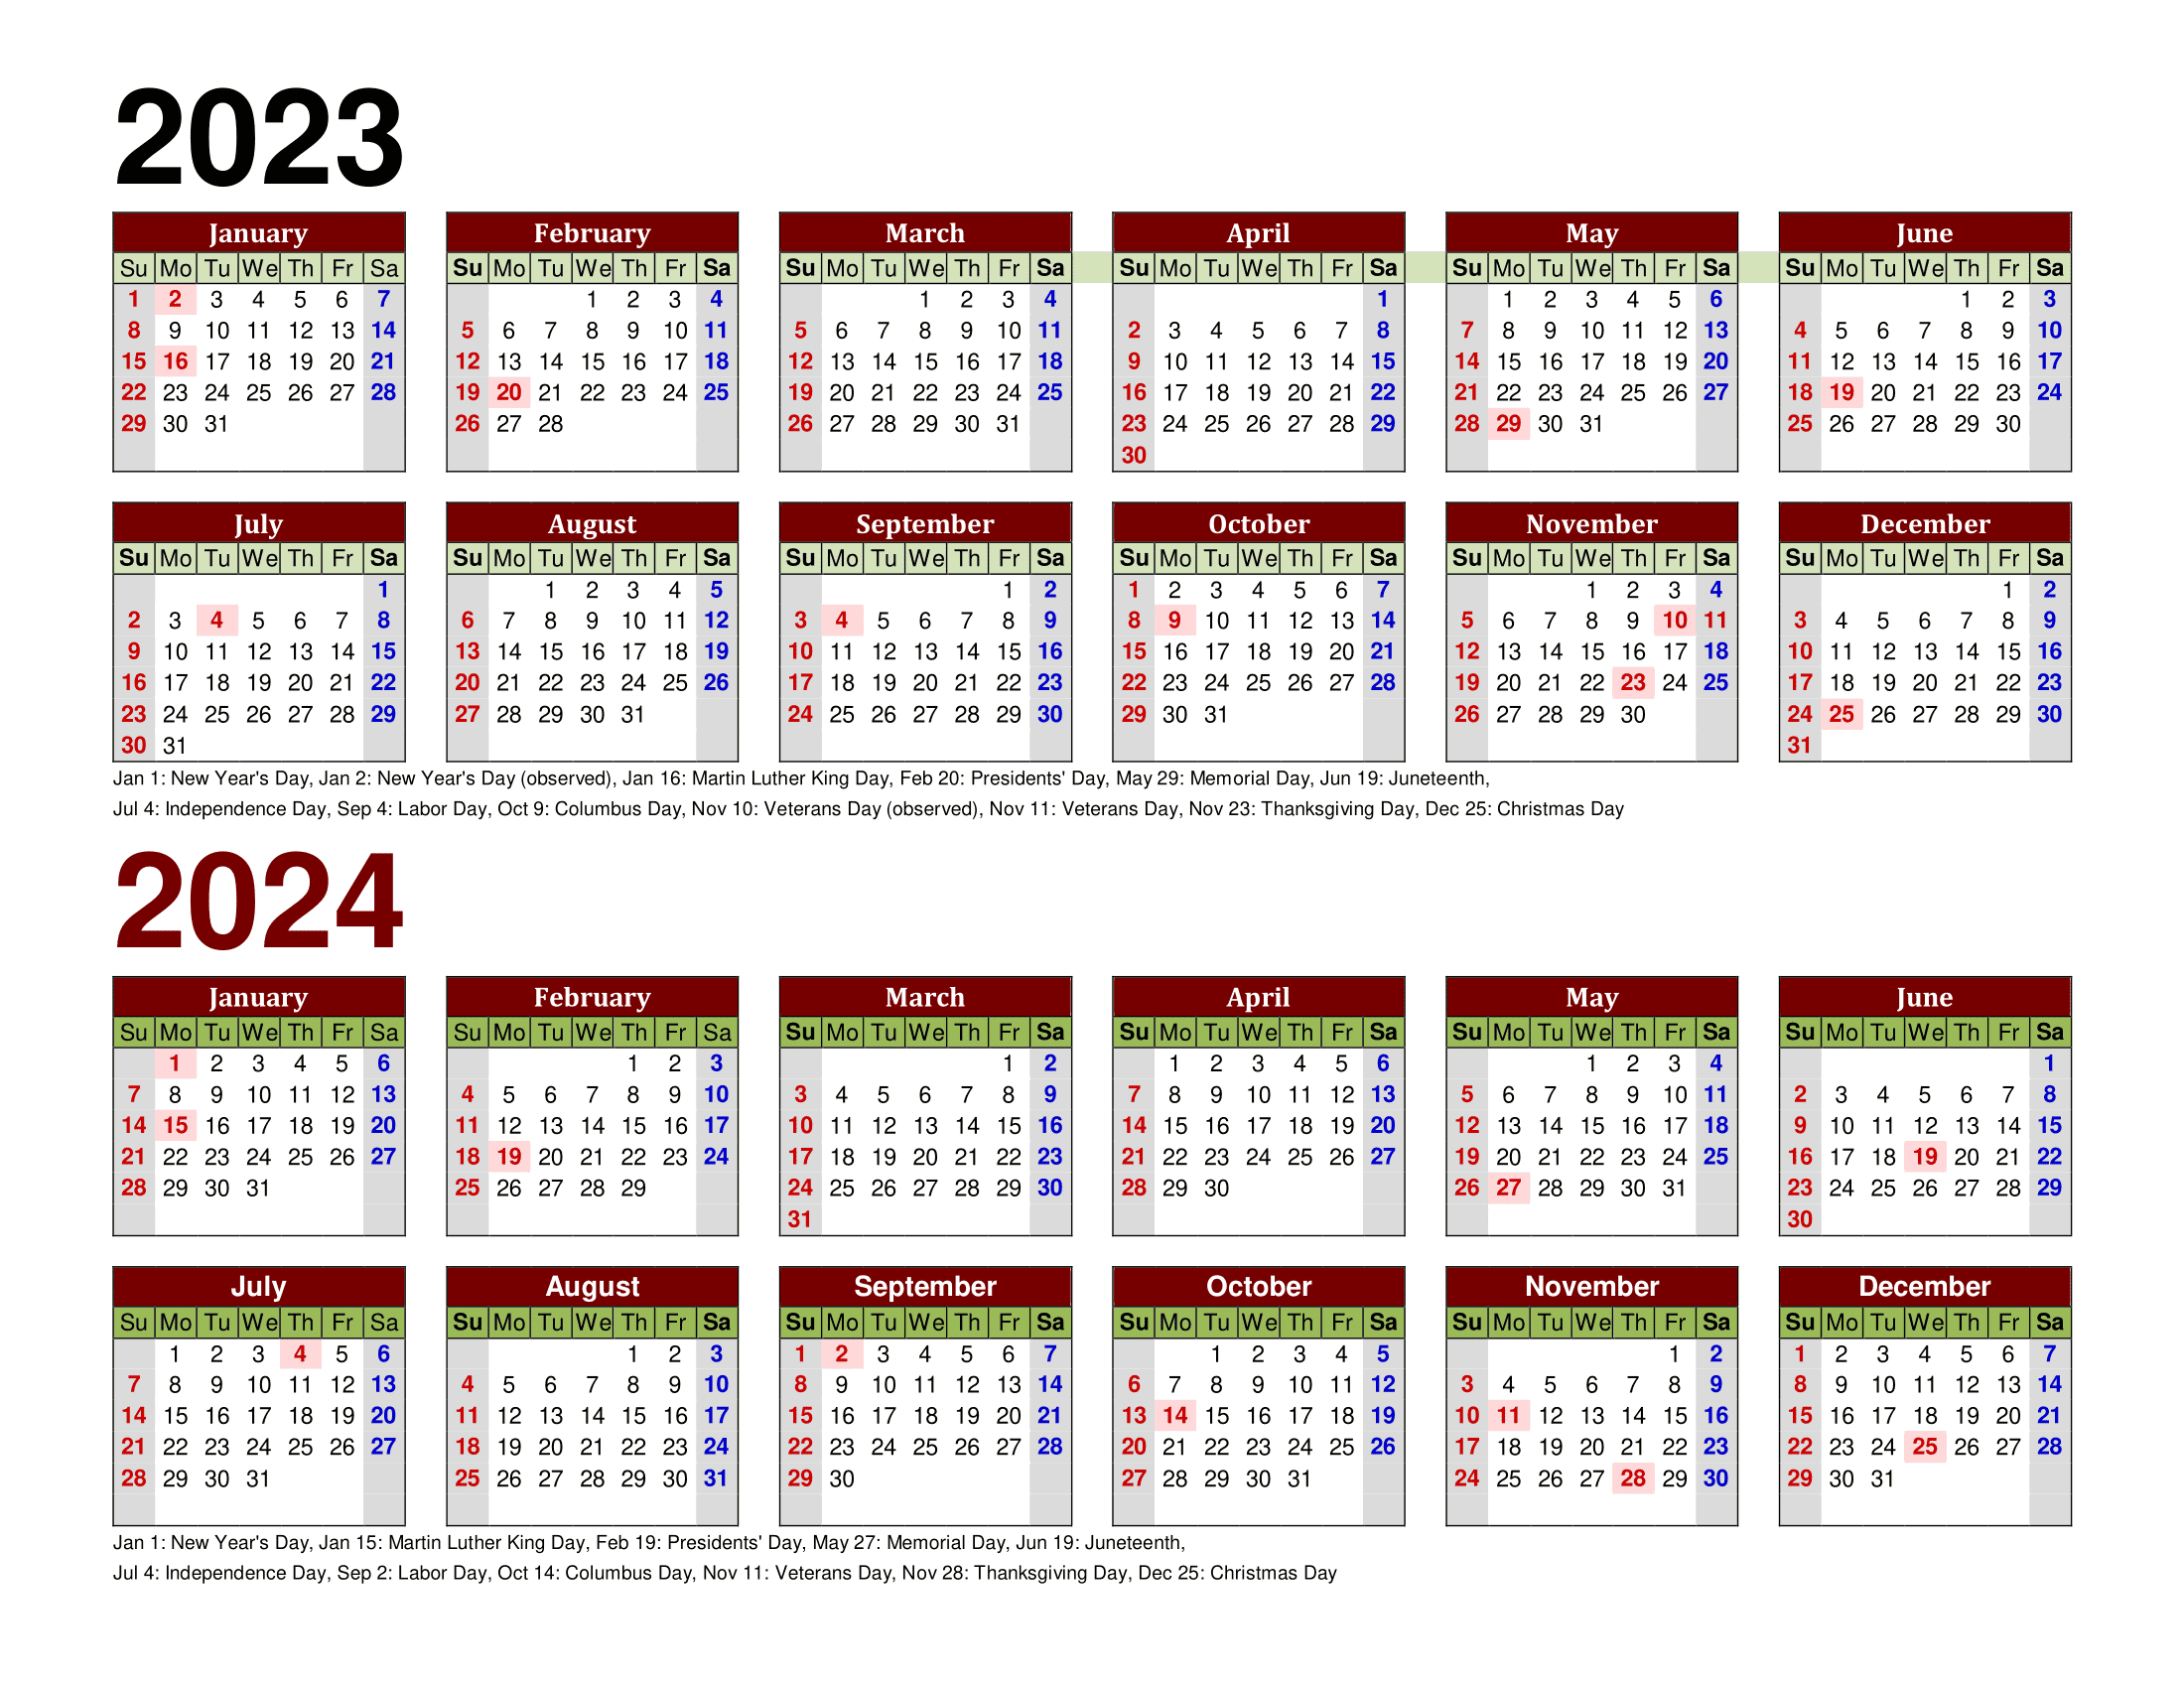 Free Printable Two Year Calendar Templates For 2023 And 2024 In Pdf | 2023 And 2024 Yearly Calendar